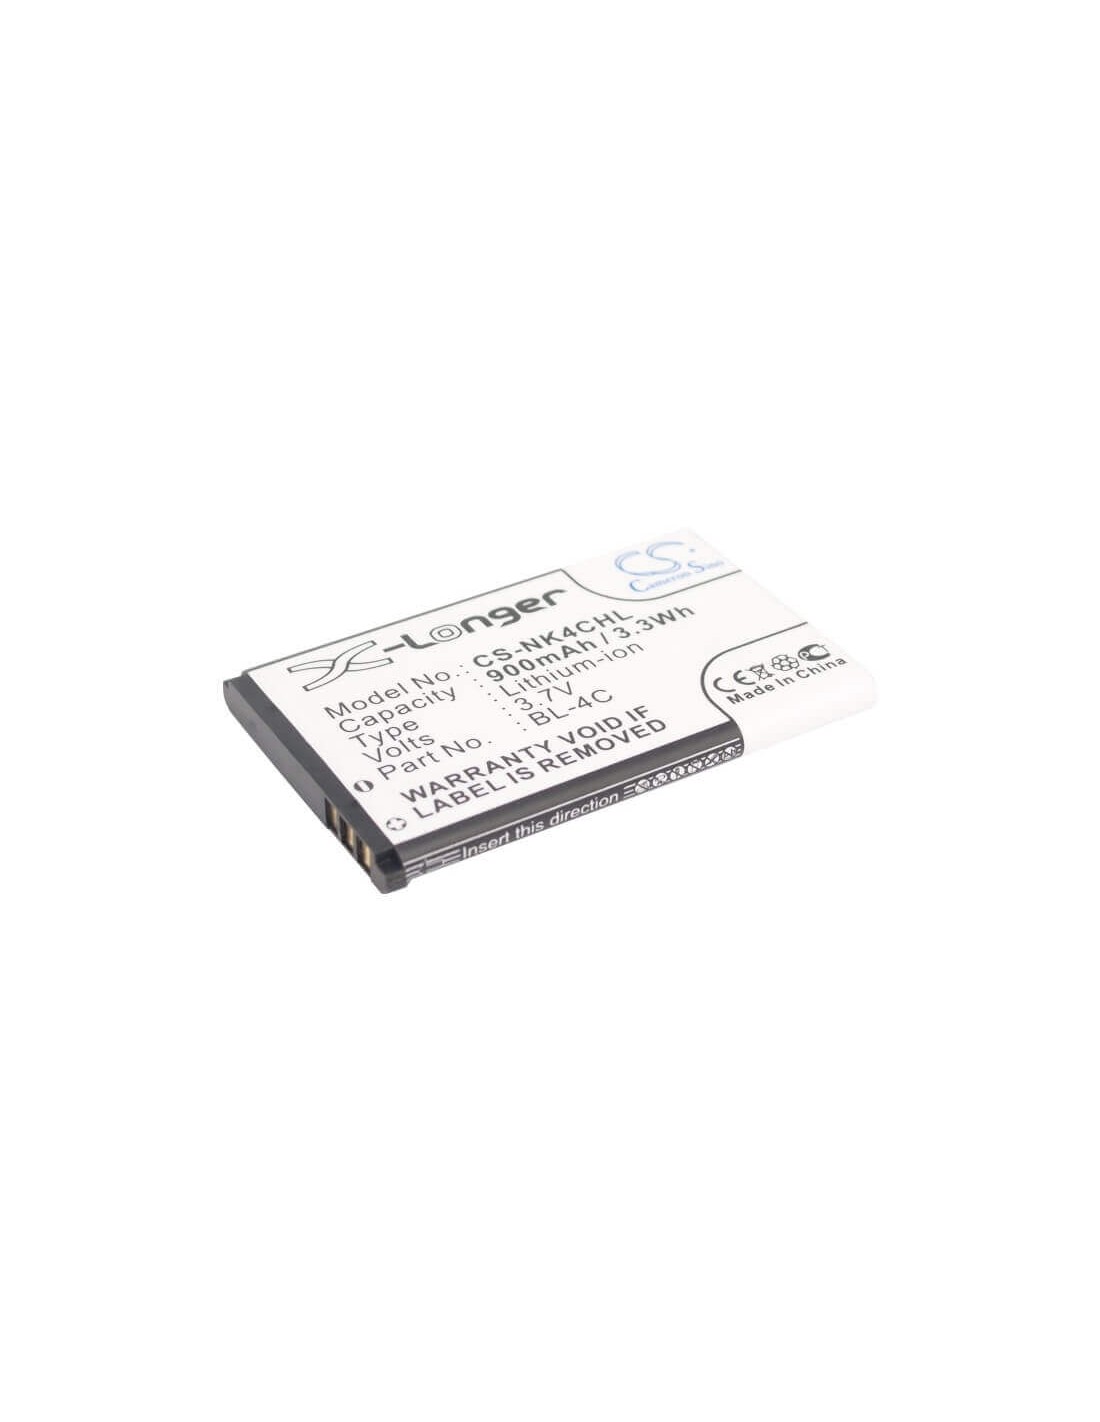 Battery for Rollei Compactline 83 3.7V, 900mAh - 3.33Wh